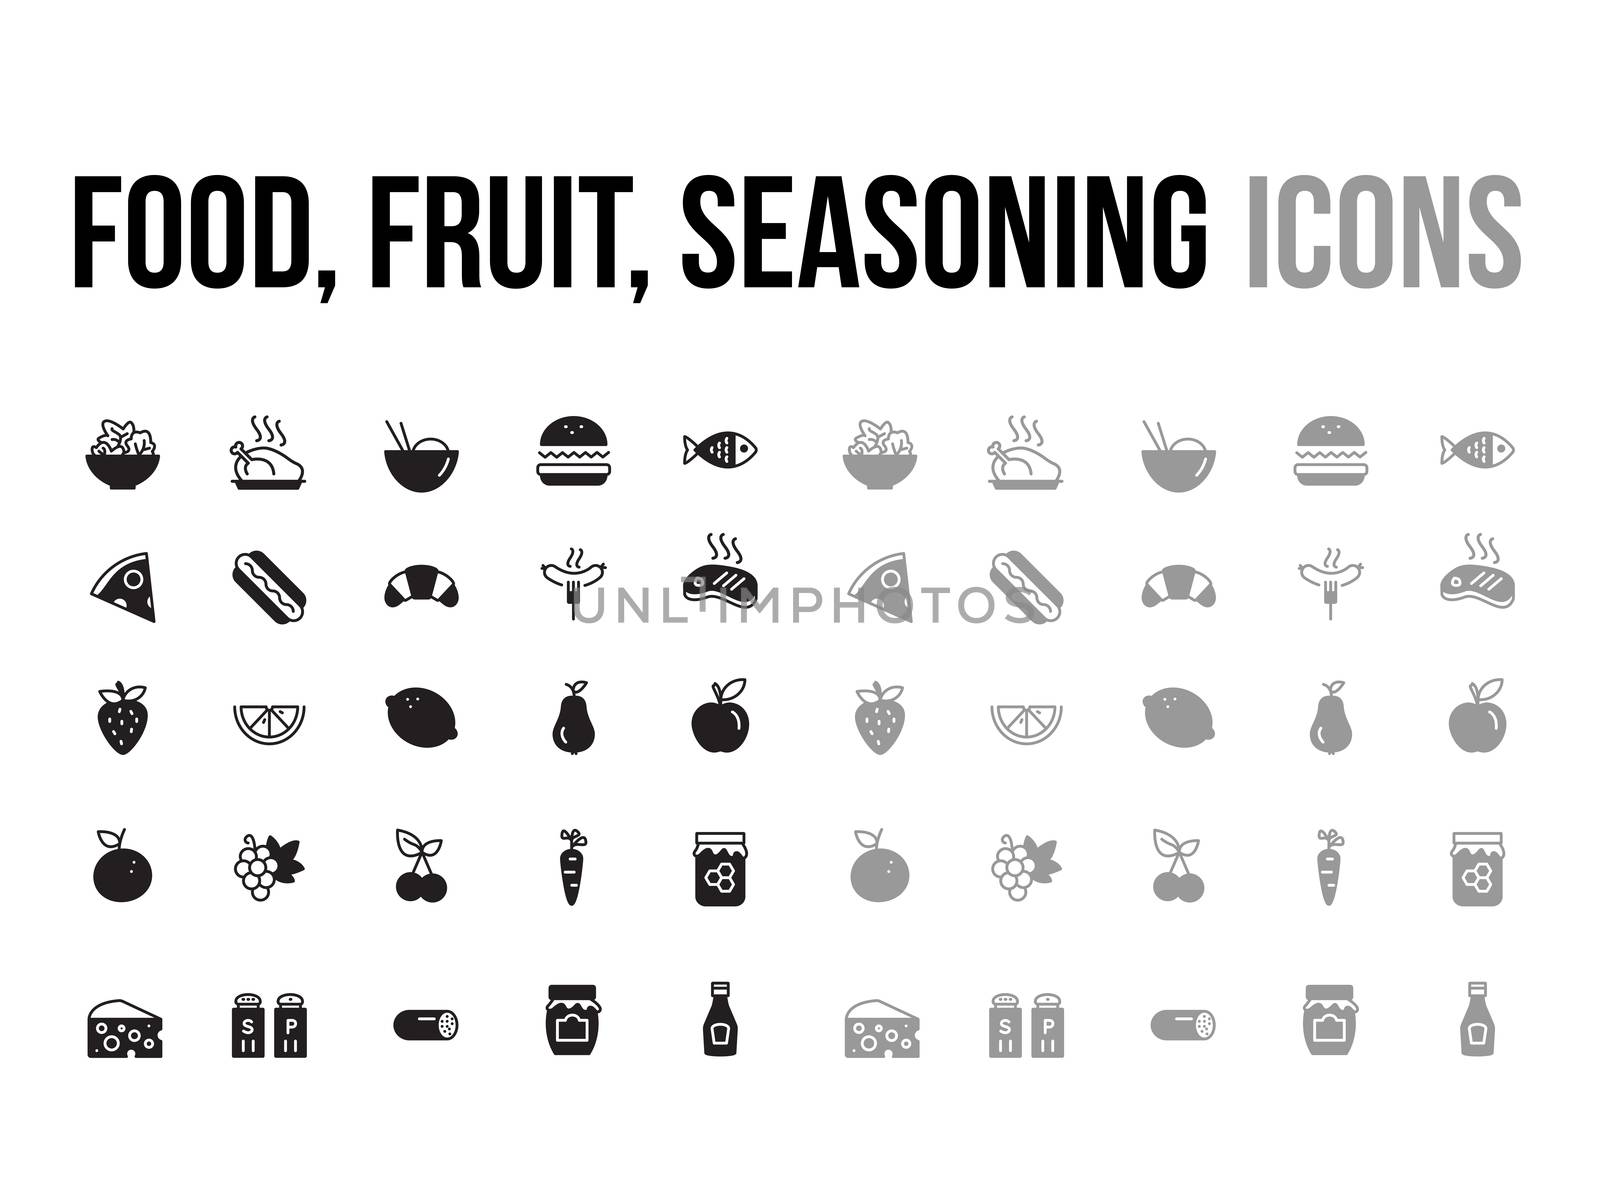 Food, fruit, seasoning vector icon collection - app and mobile web responsive	

